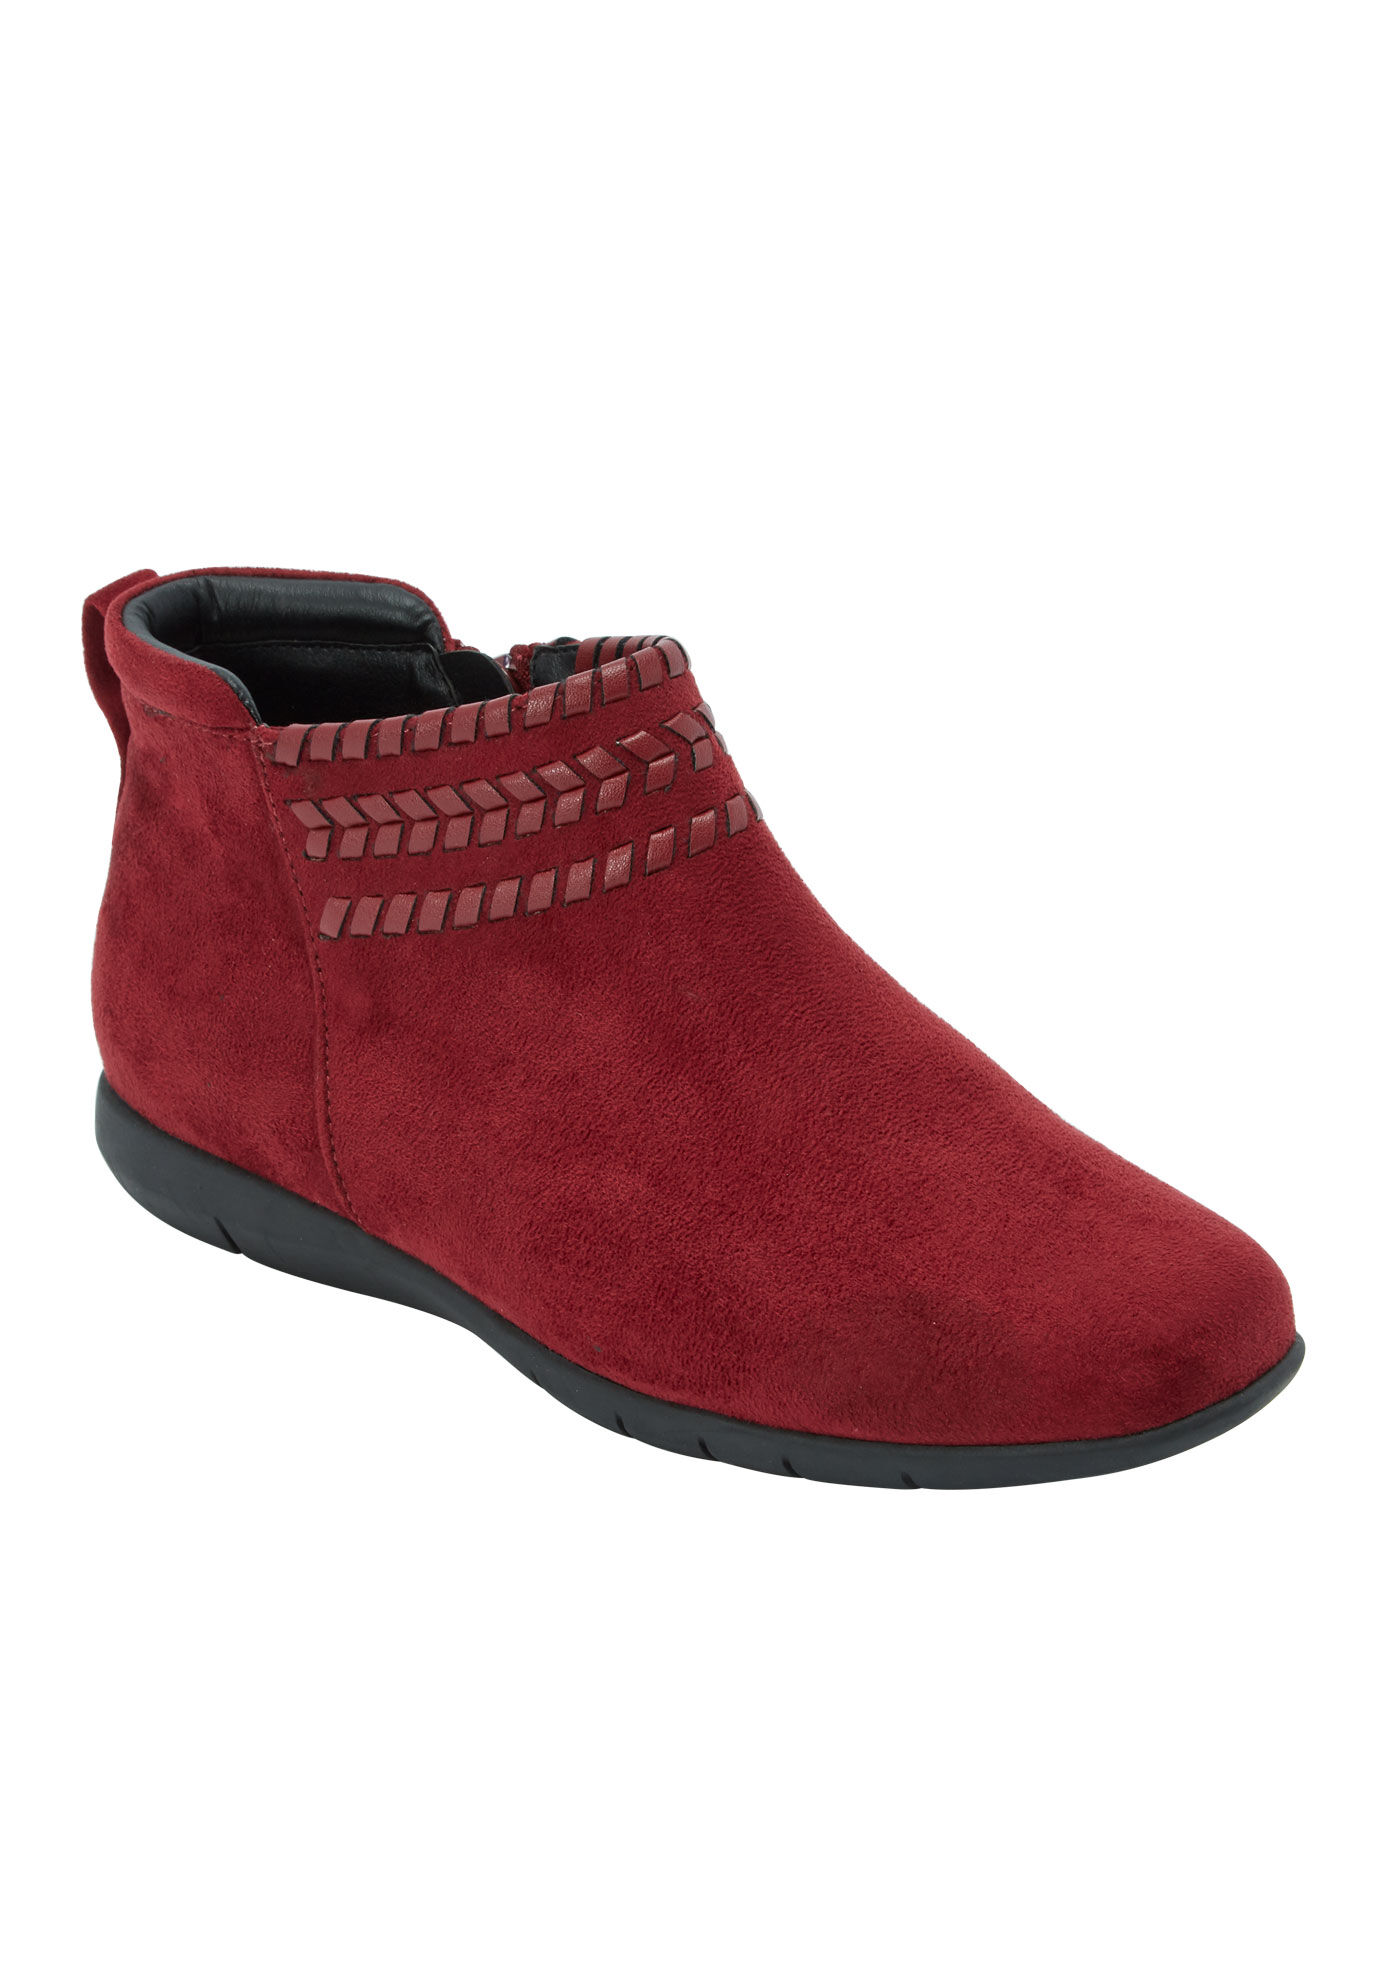 red bootie outlet